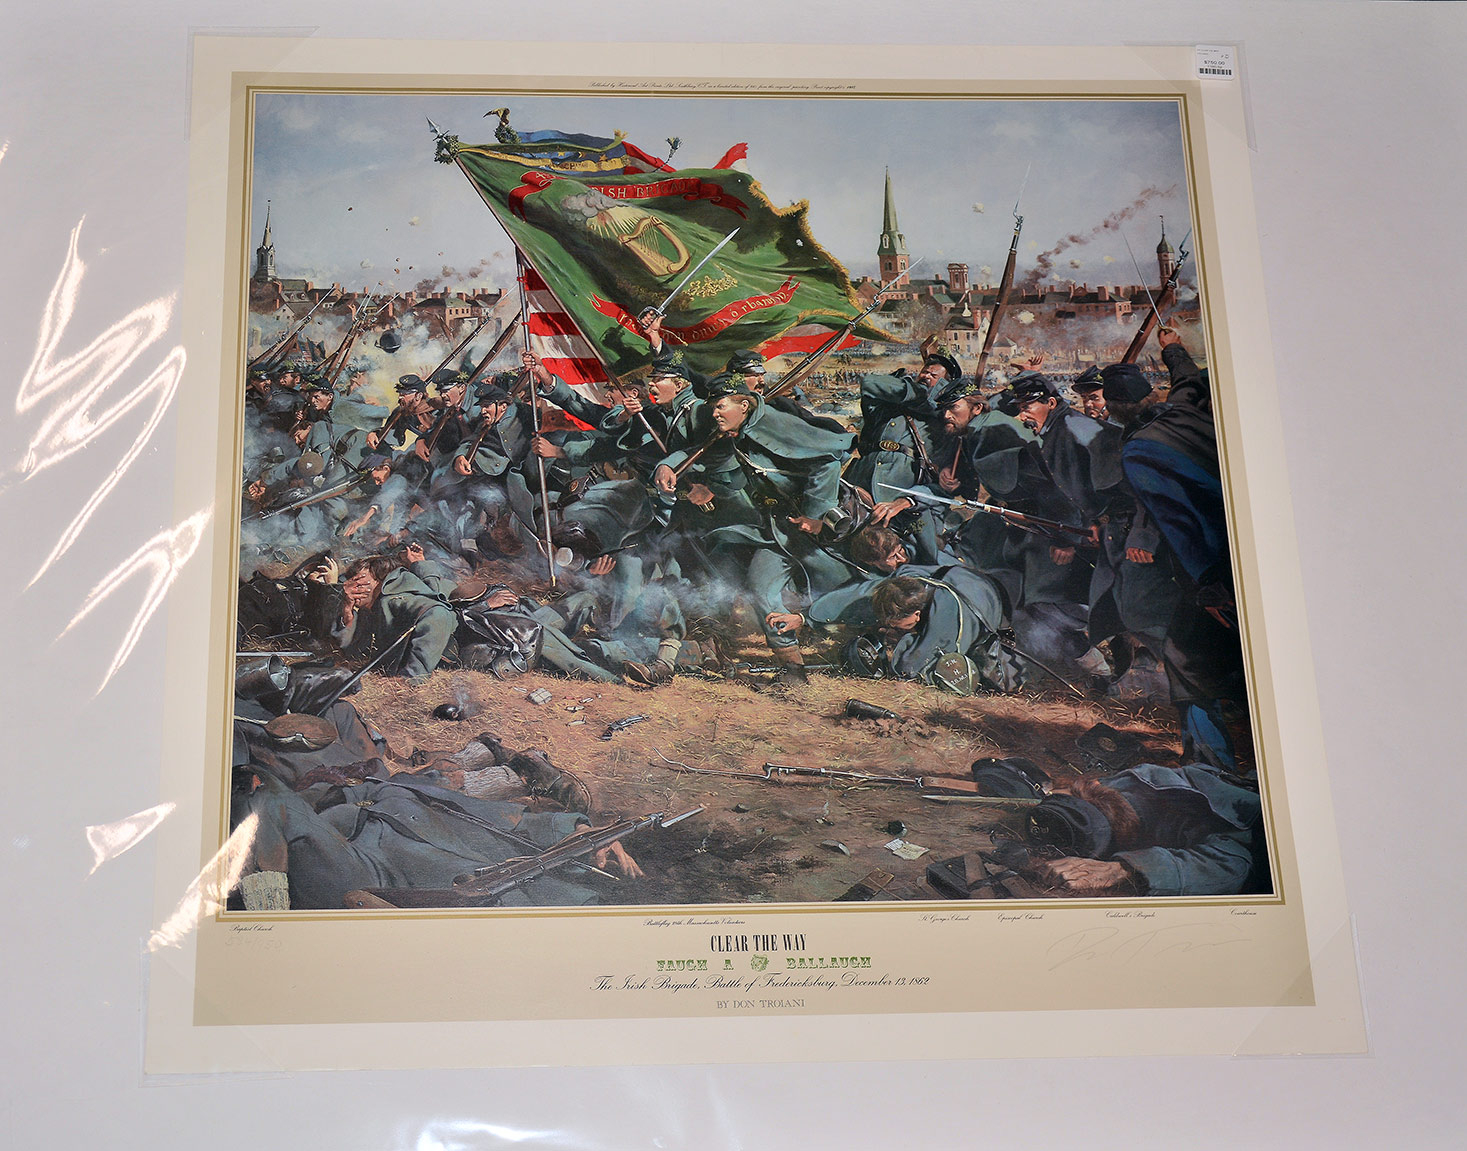 MUCH SOUGHT AFTER DON TROIANI IRISH BRIGADE PRINT “CLEAR THE WAY”